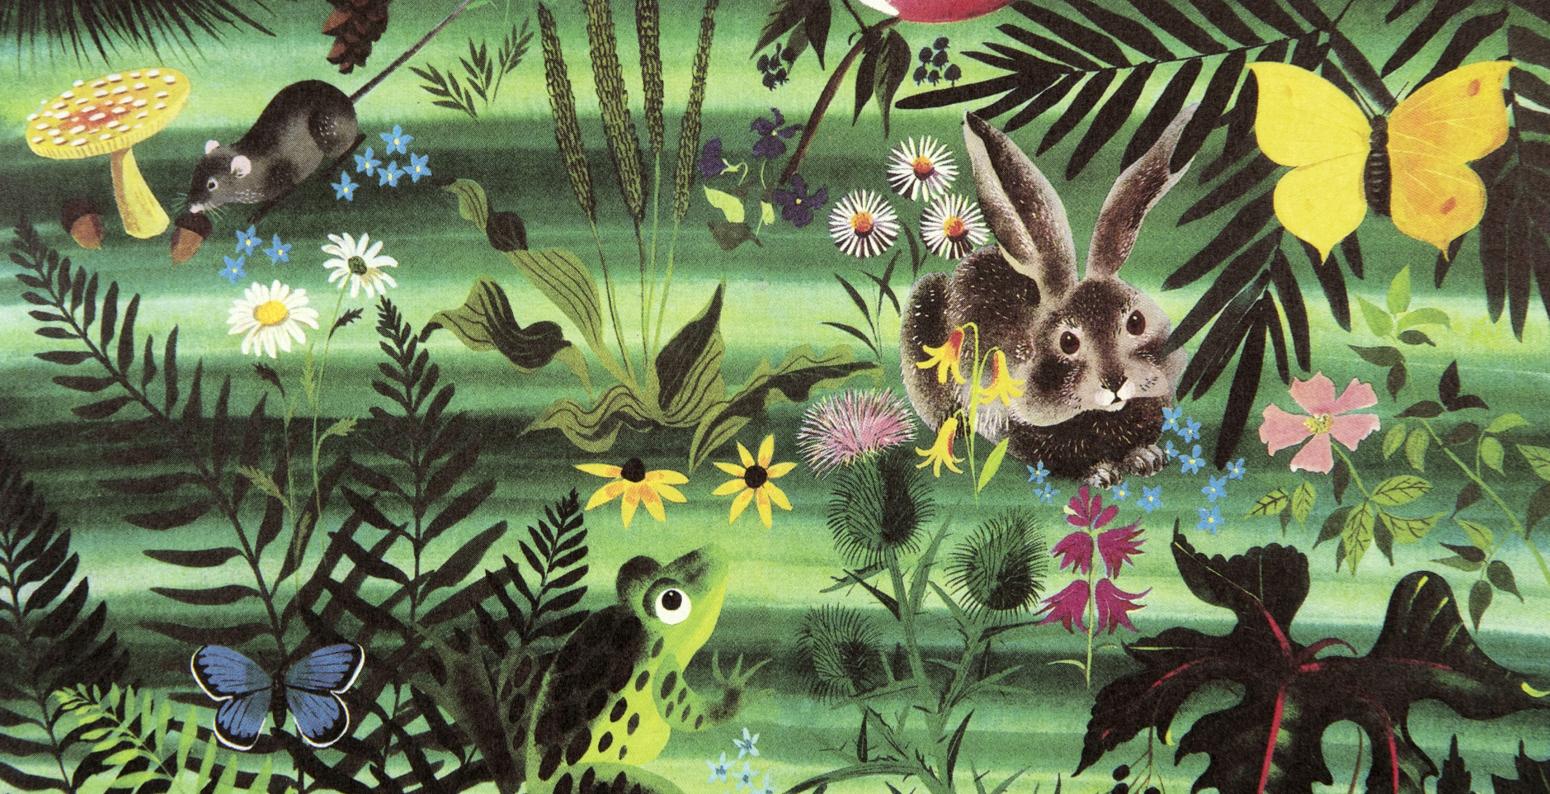 Illustration of bunny and animals in ferns. 